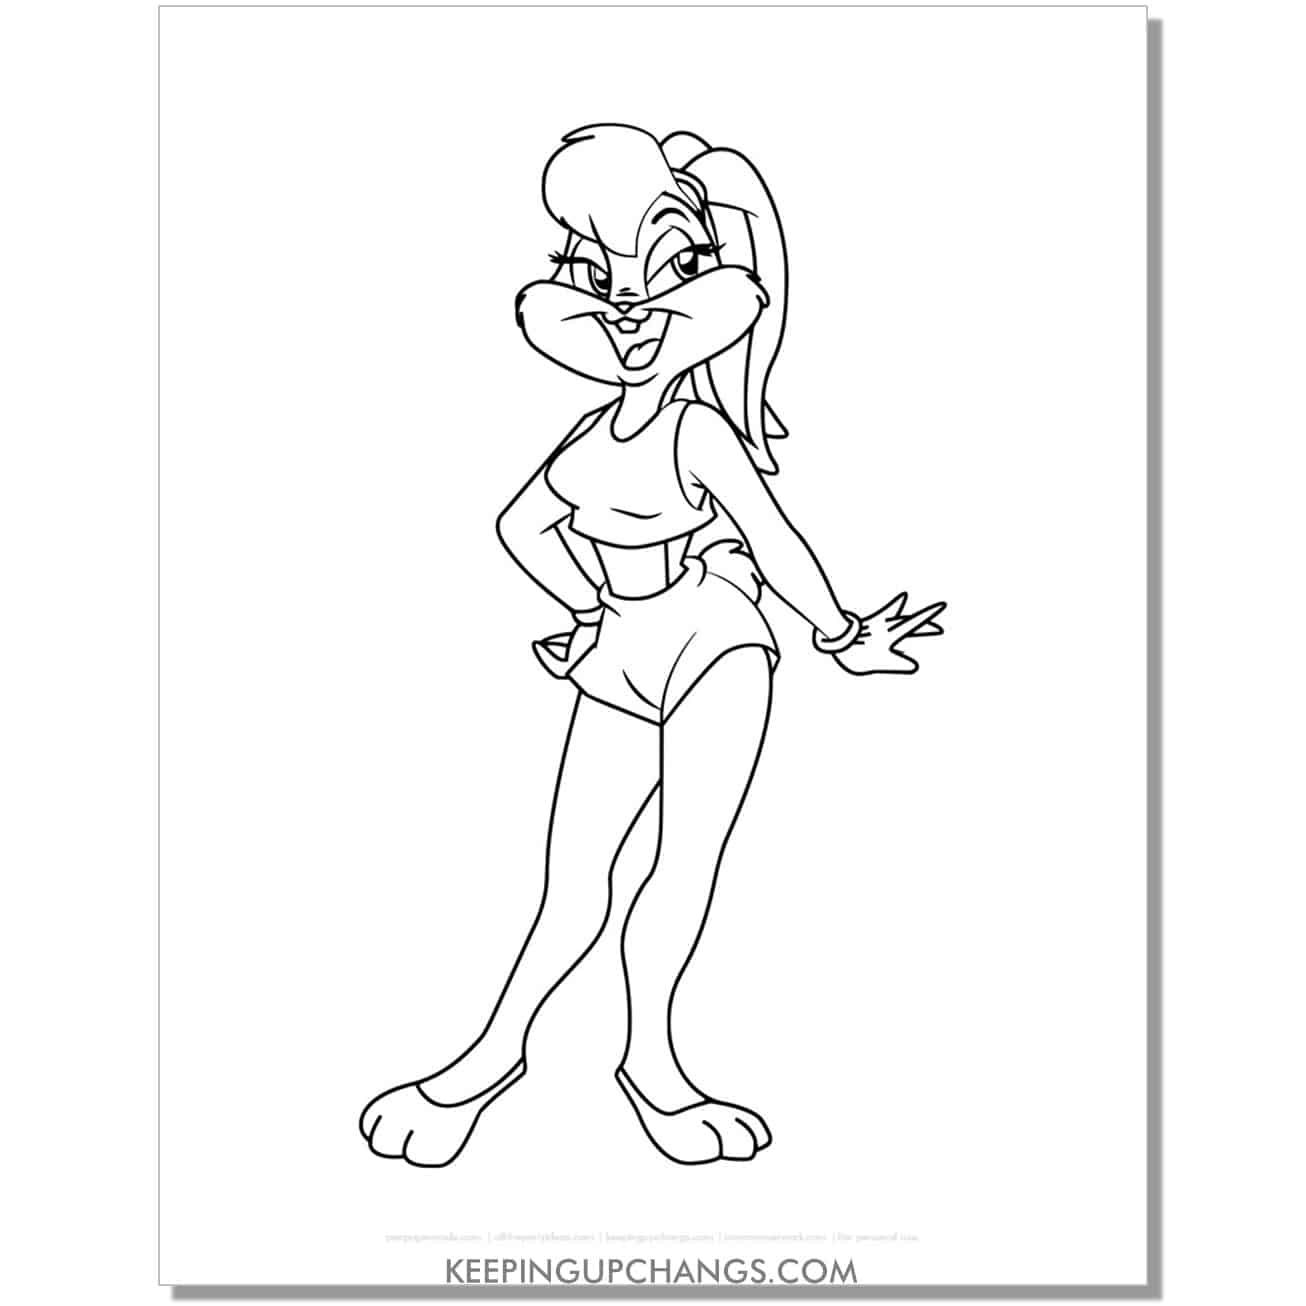 free lola bunny rabbit space jam looney tunes coloring page, sheet.